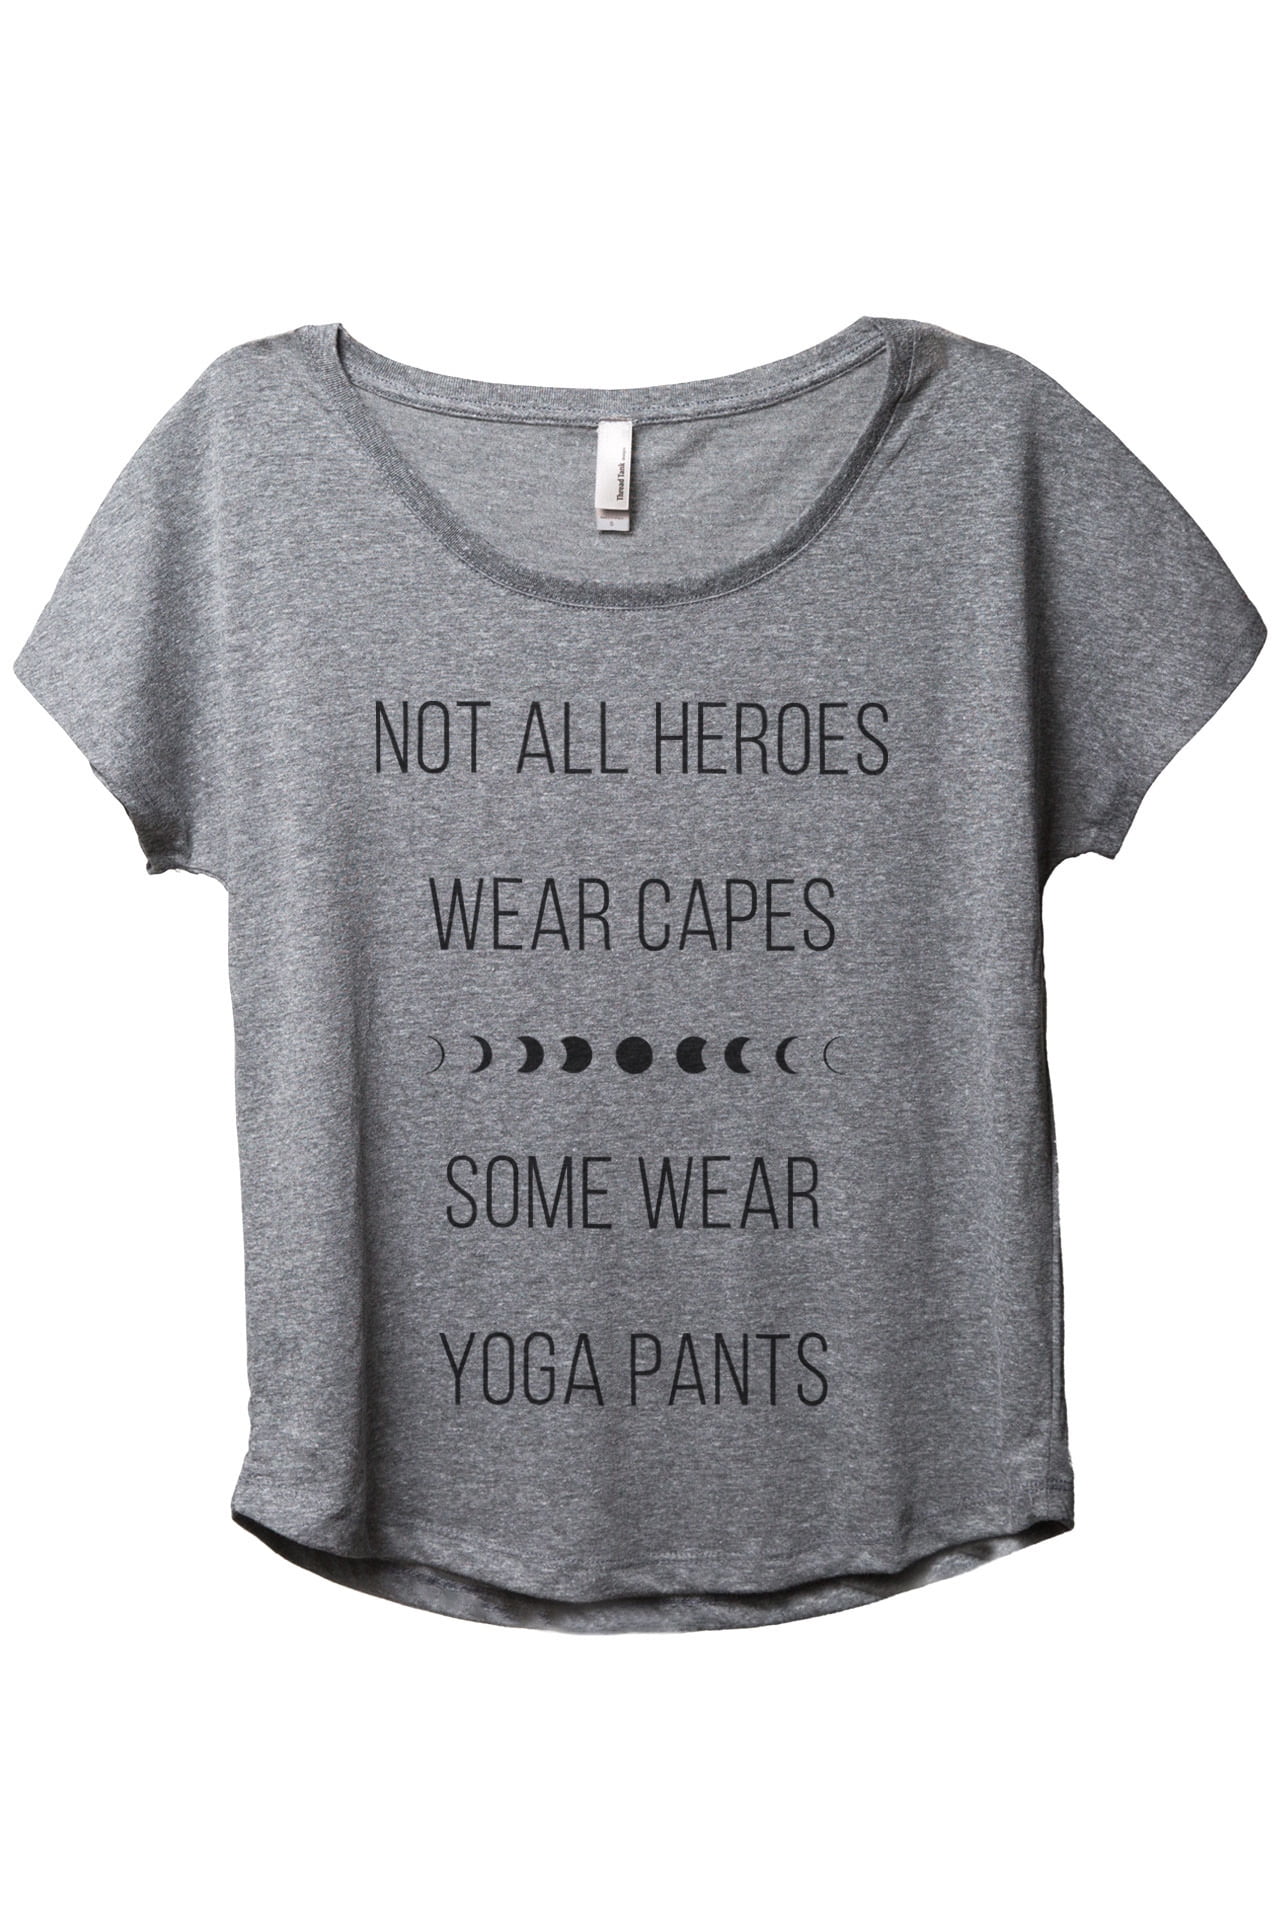 Not All Heroes Wear Capes Some Wear Yoga Pants Women's Fashion Slouchy  Dolman T-Shirt Tee Heather Grey Large 